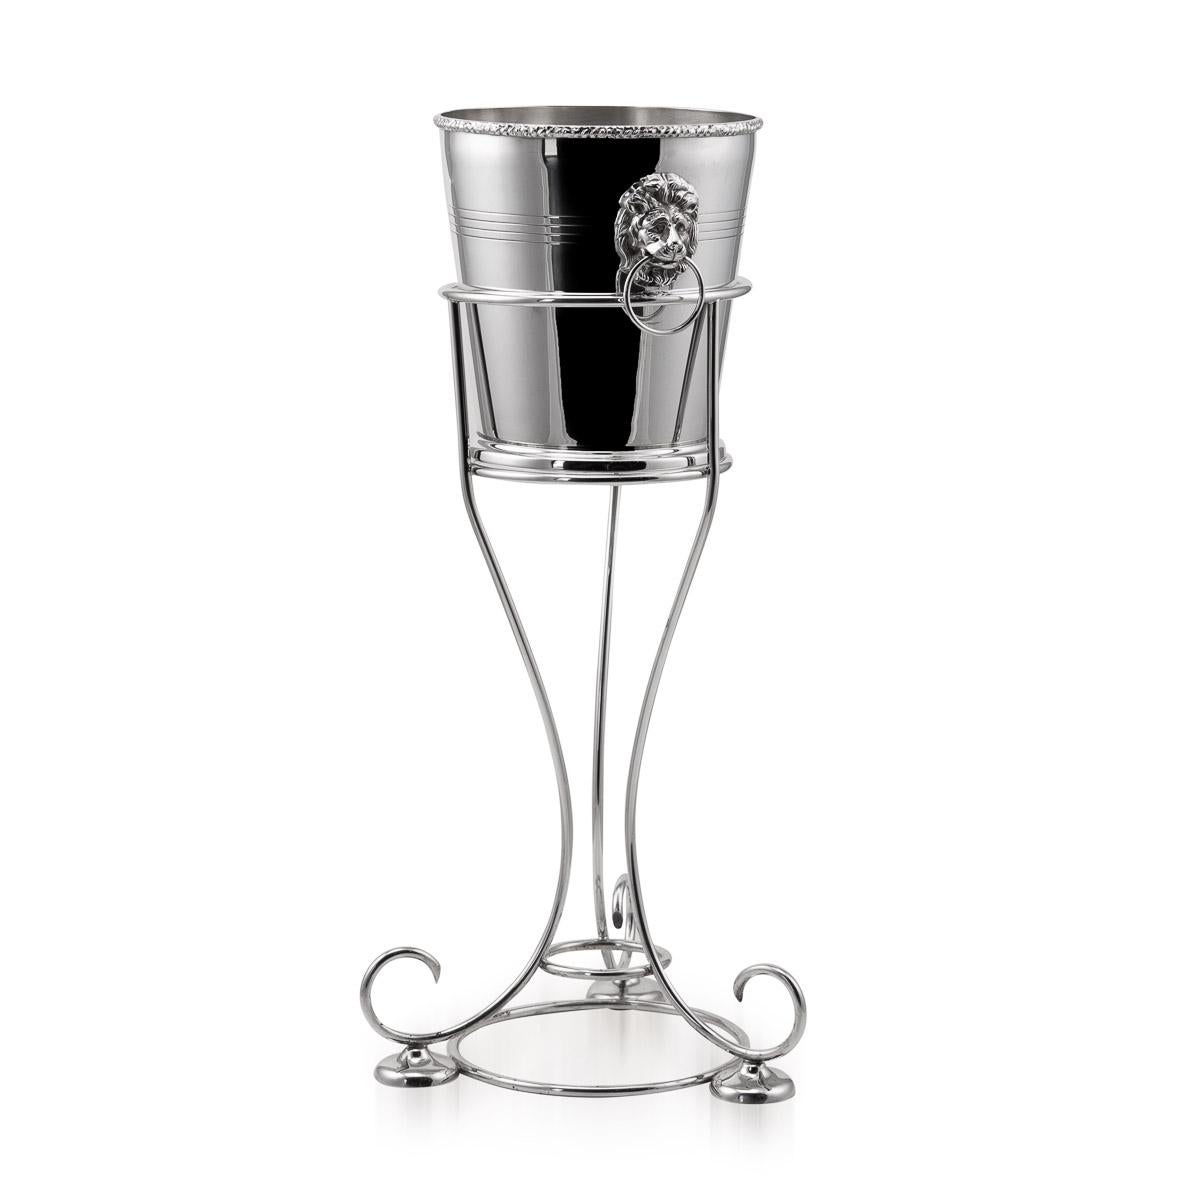 20th Century British silver plated wine cooler with cast lion head handles and scroll stand, made by the renowned silversmiths Mappin & Webb.

Condition
In Great Condition - No Damage, just general wear.

Size
Overall Diameter: 30cm
Height: